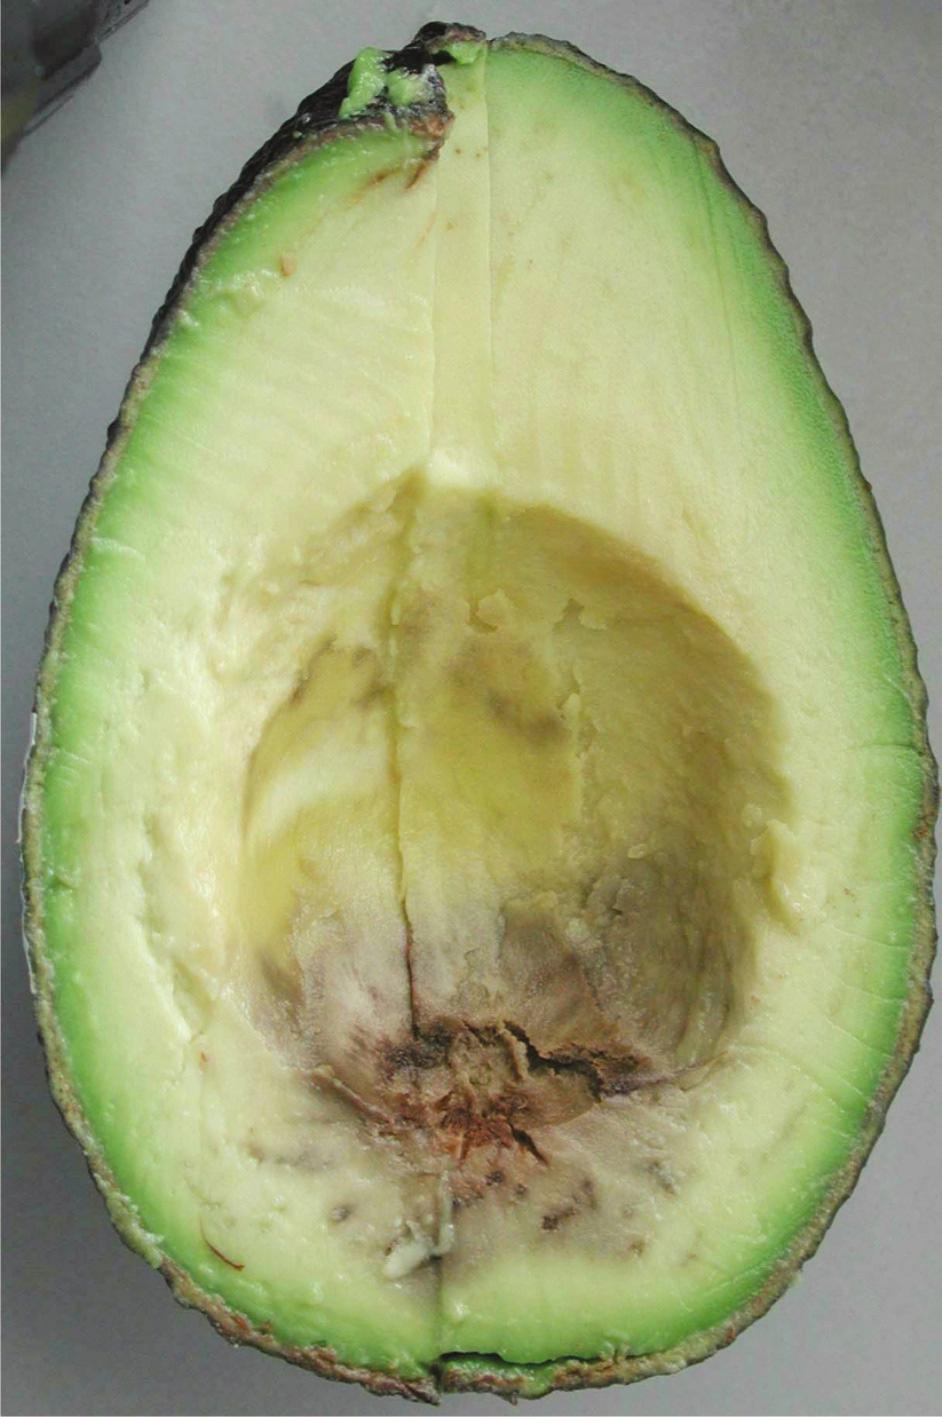 Avocado Growers Manual Postharvesting Handling Bruising Flesh discolouration Uneven ripening: is where areas of flesh around the seed remain hard as the fruit ripen.